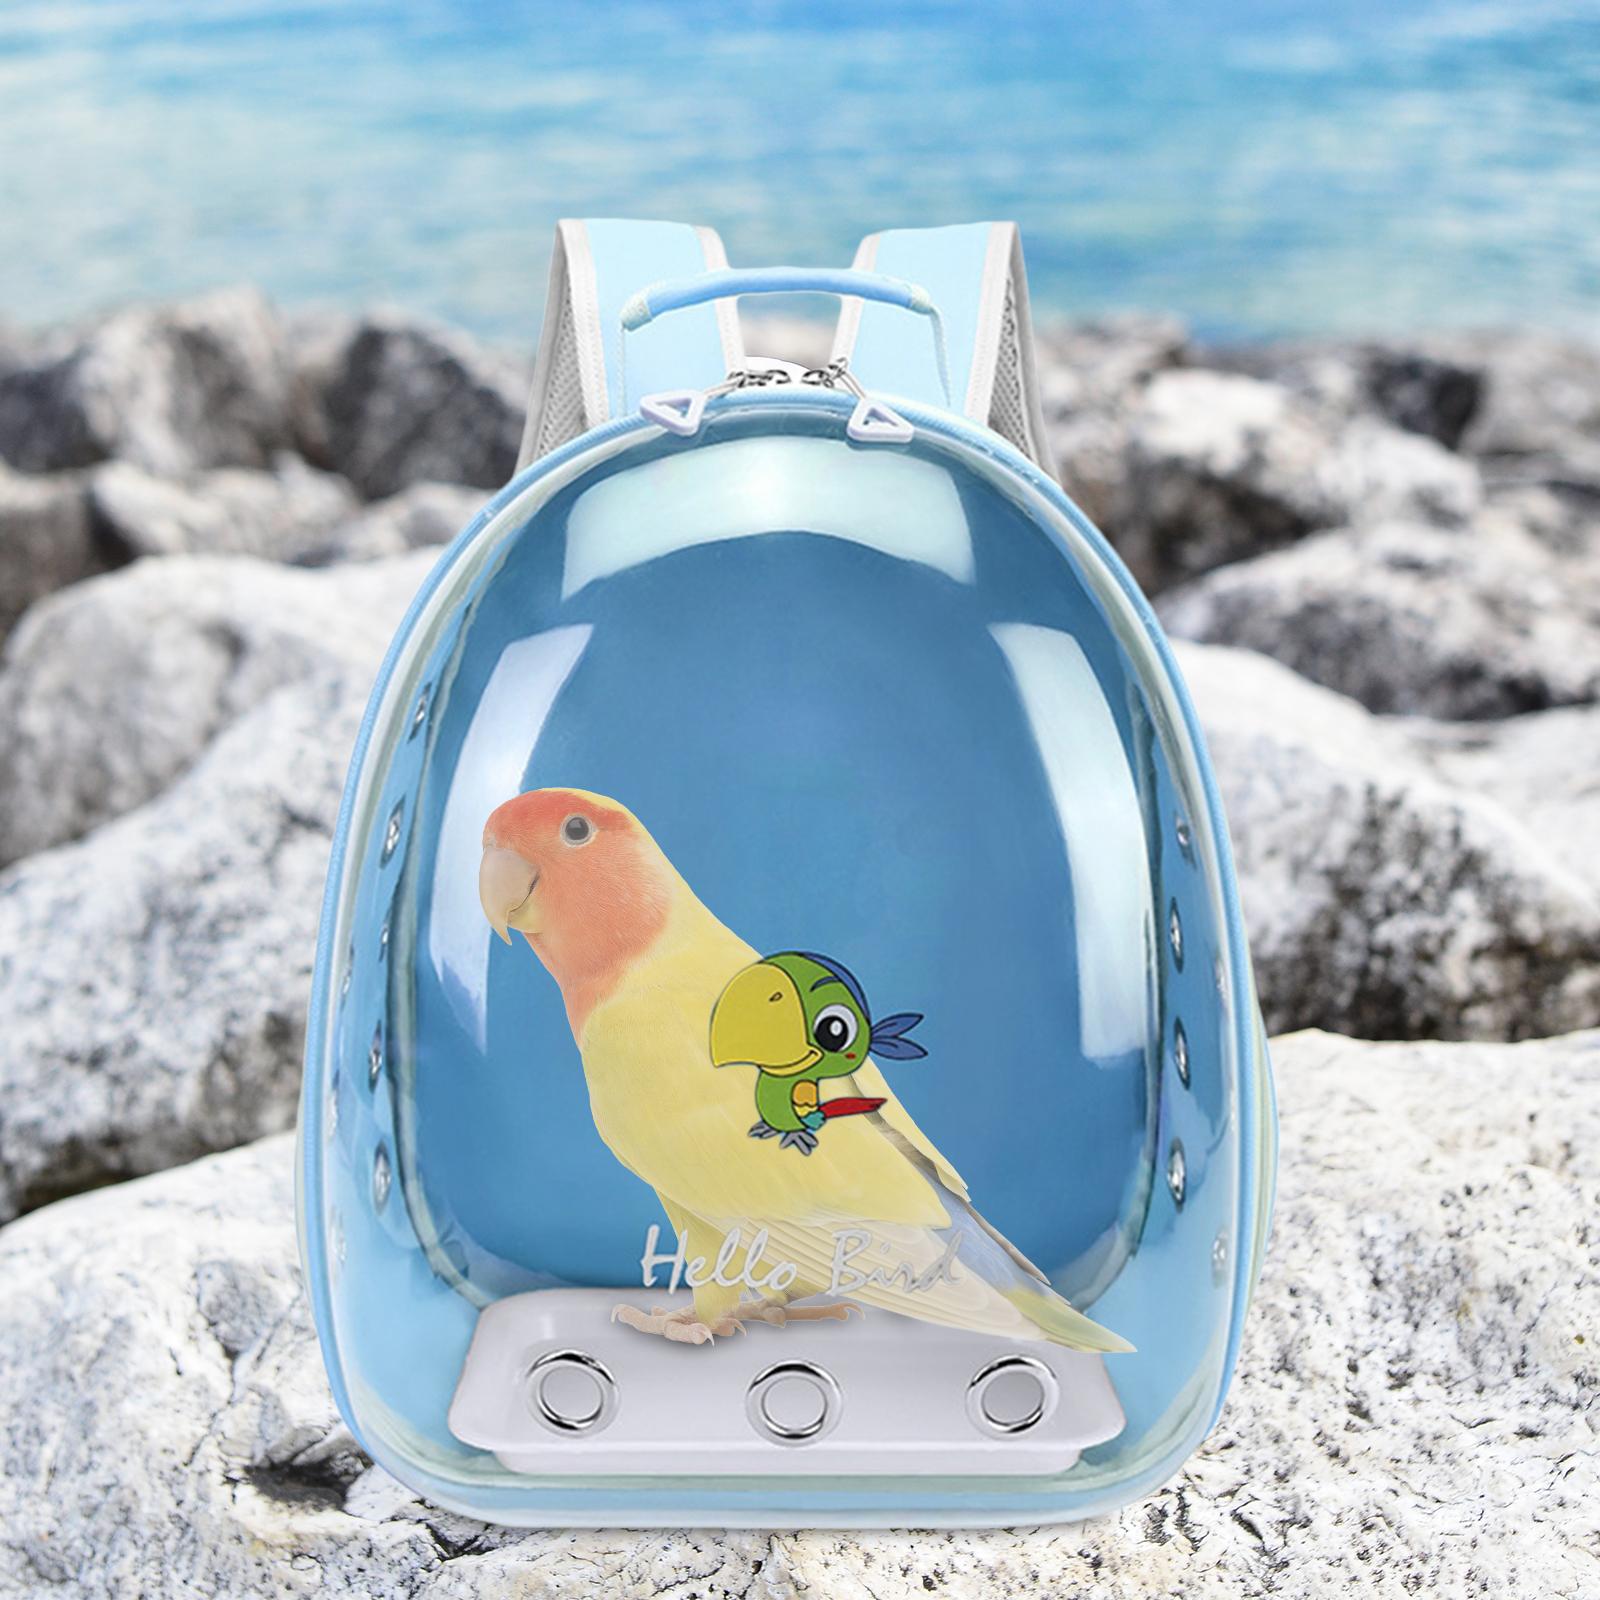 Aimishion Bird Carrier Backpack Portable Bird Travel Cage for Parakeets